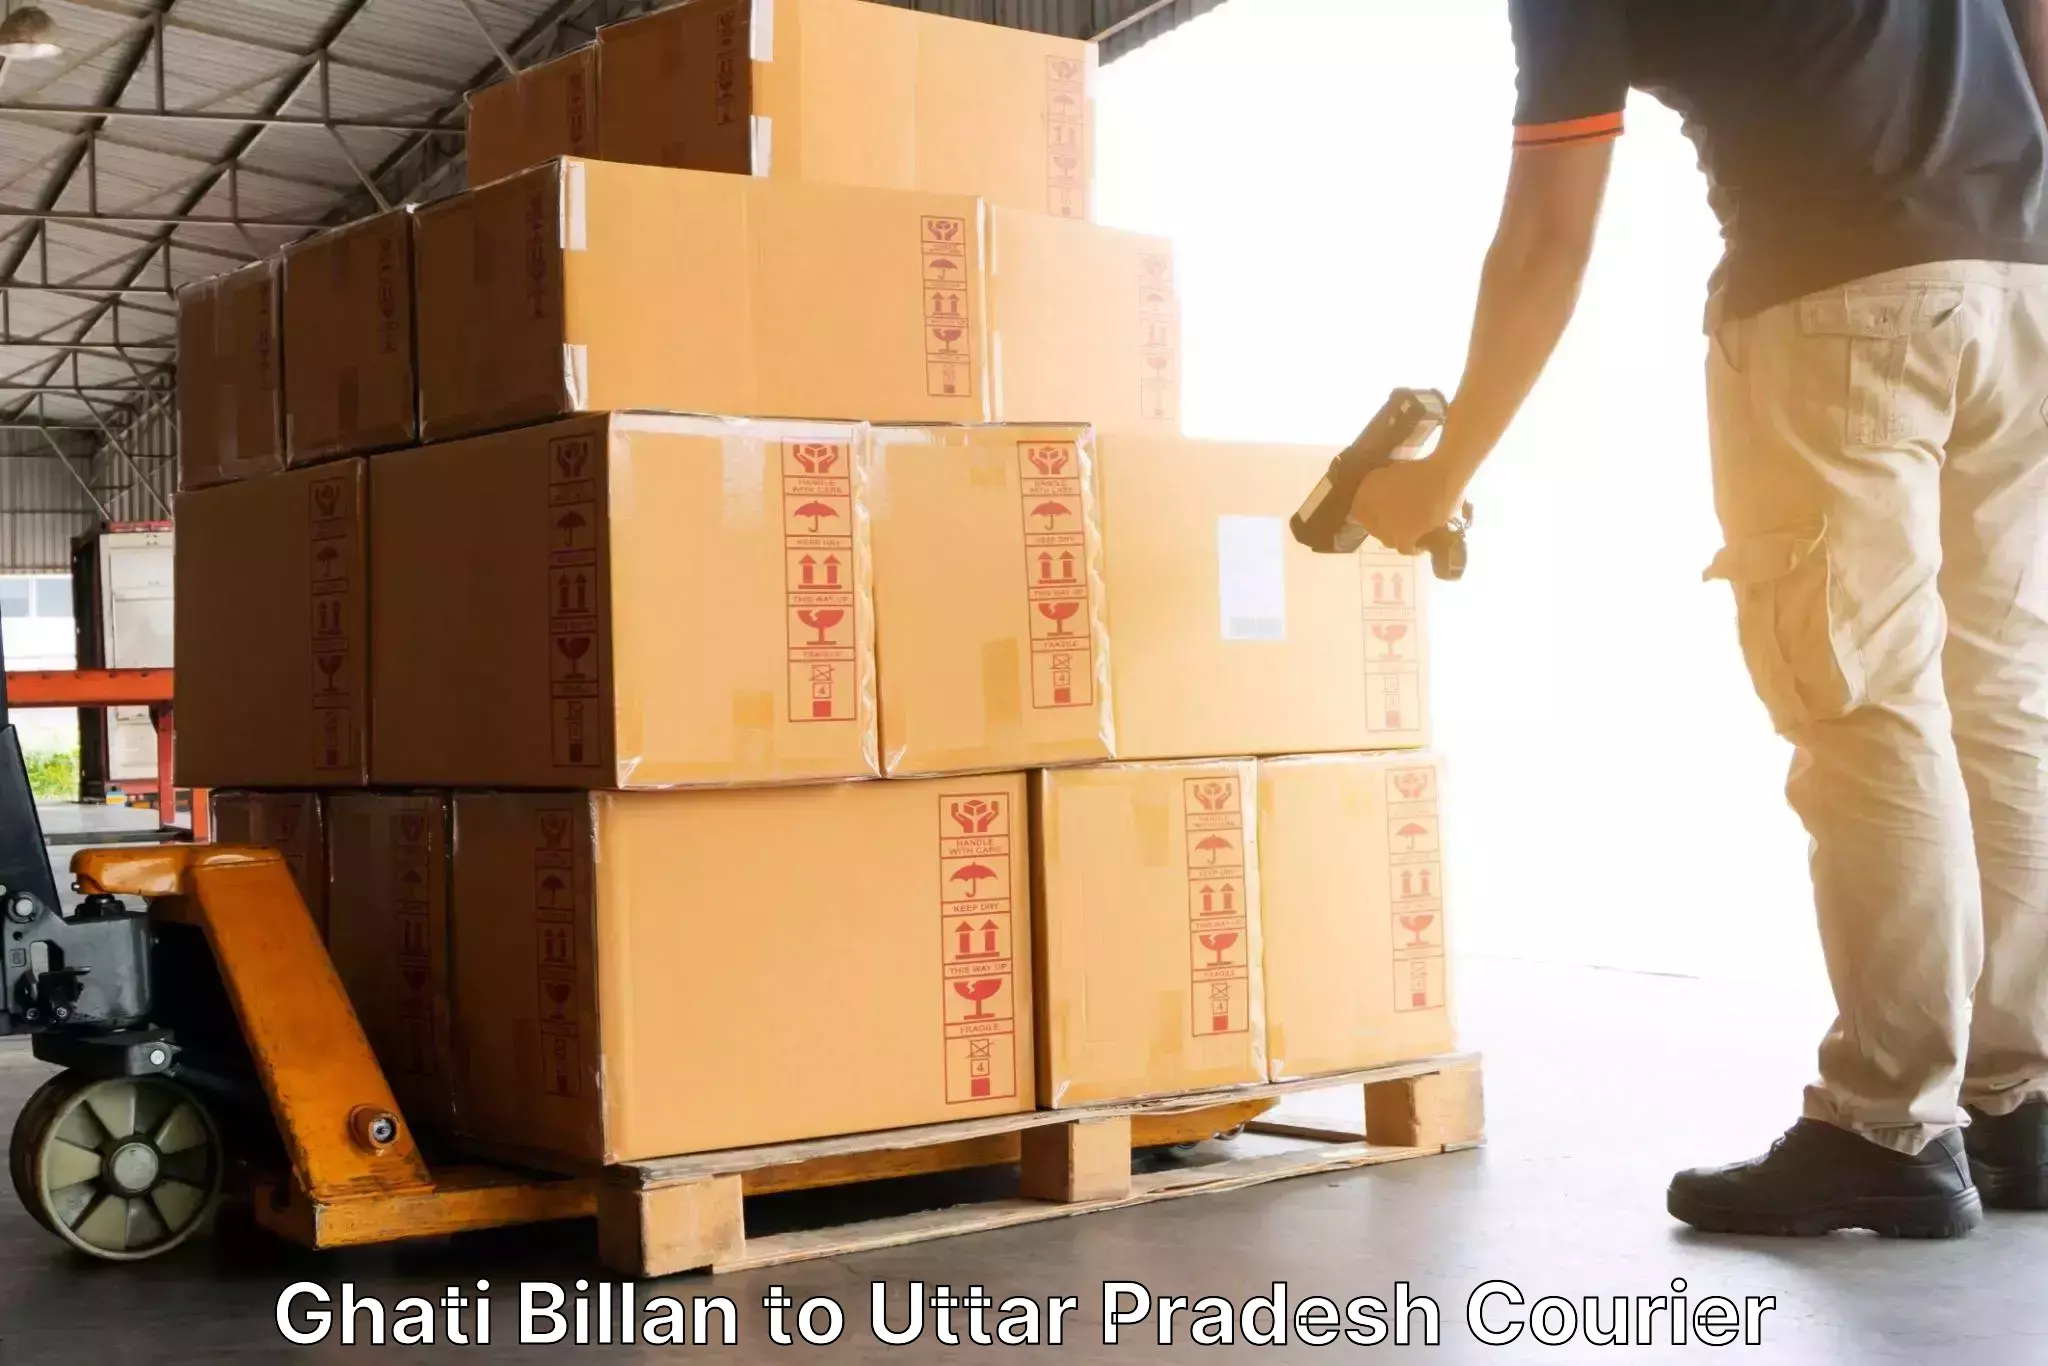 Efficient shipping operations Ghati Billan to Bareilly